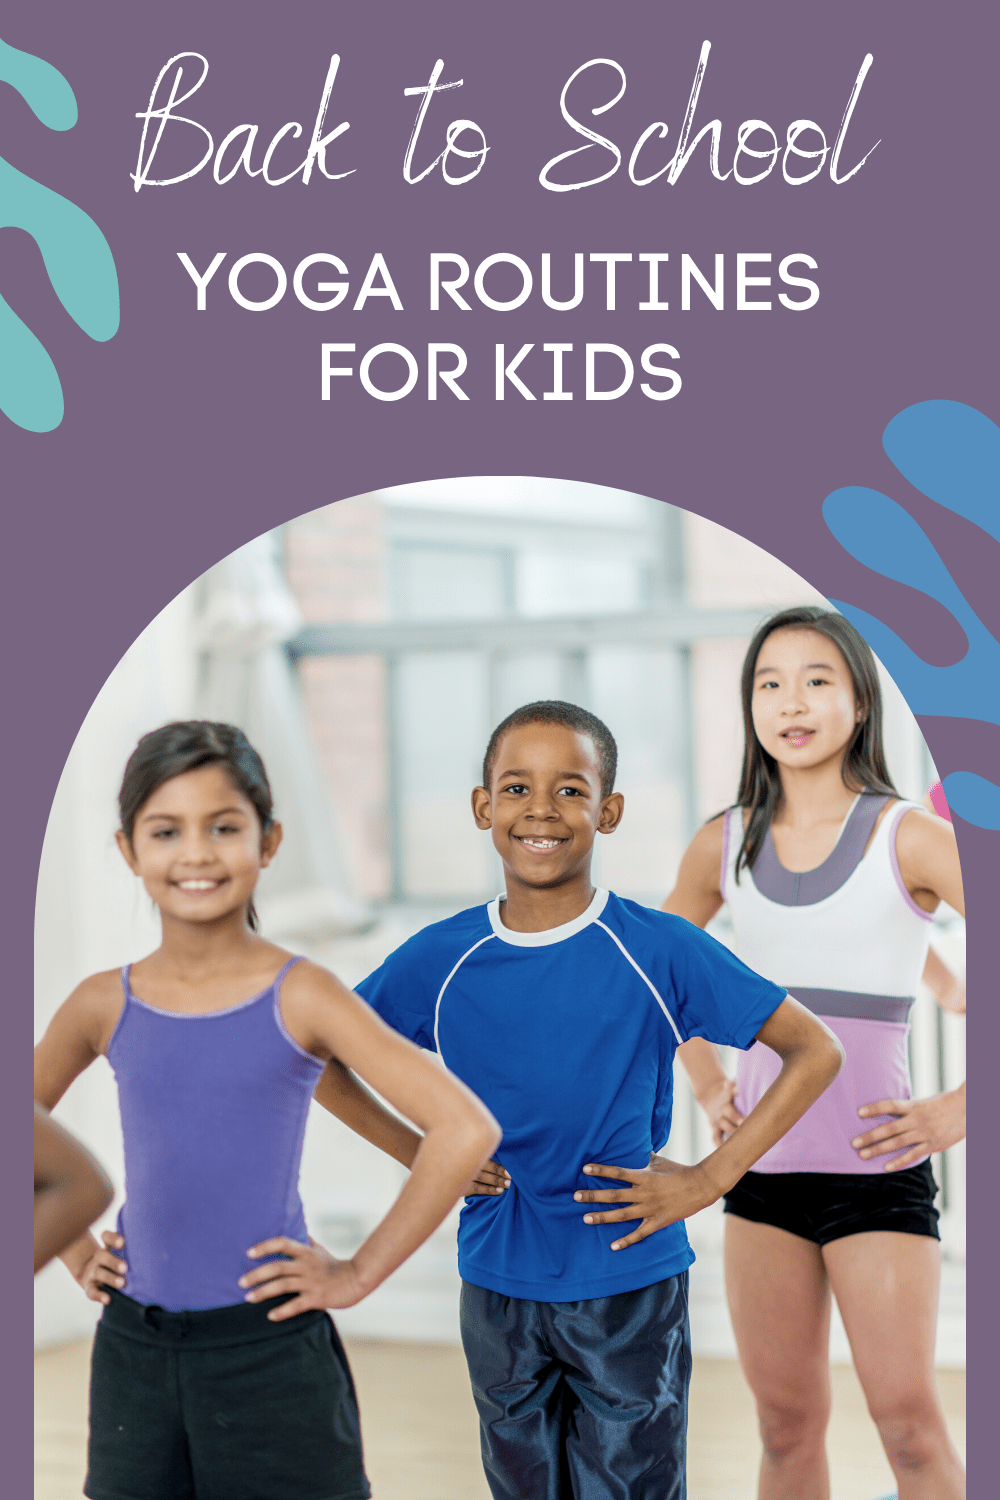 https://kumarahyoga.com/wp-content/uploads/2021/08/PIN-Back-to-School-Yoga-Routines-for-Kids.png